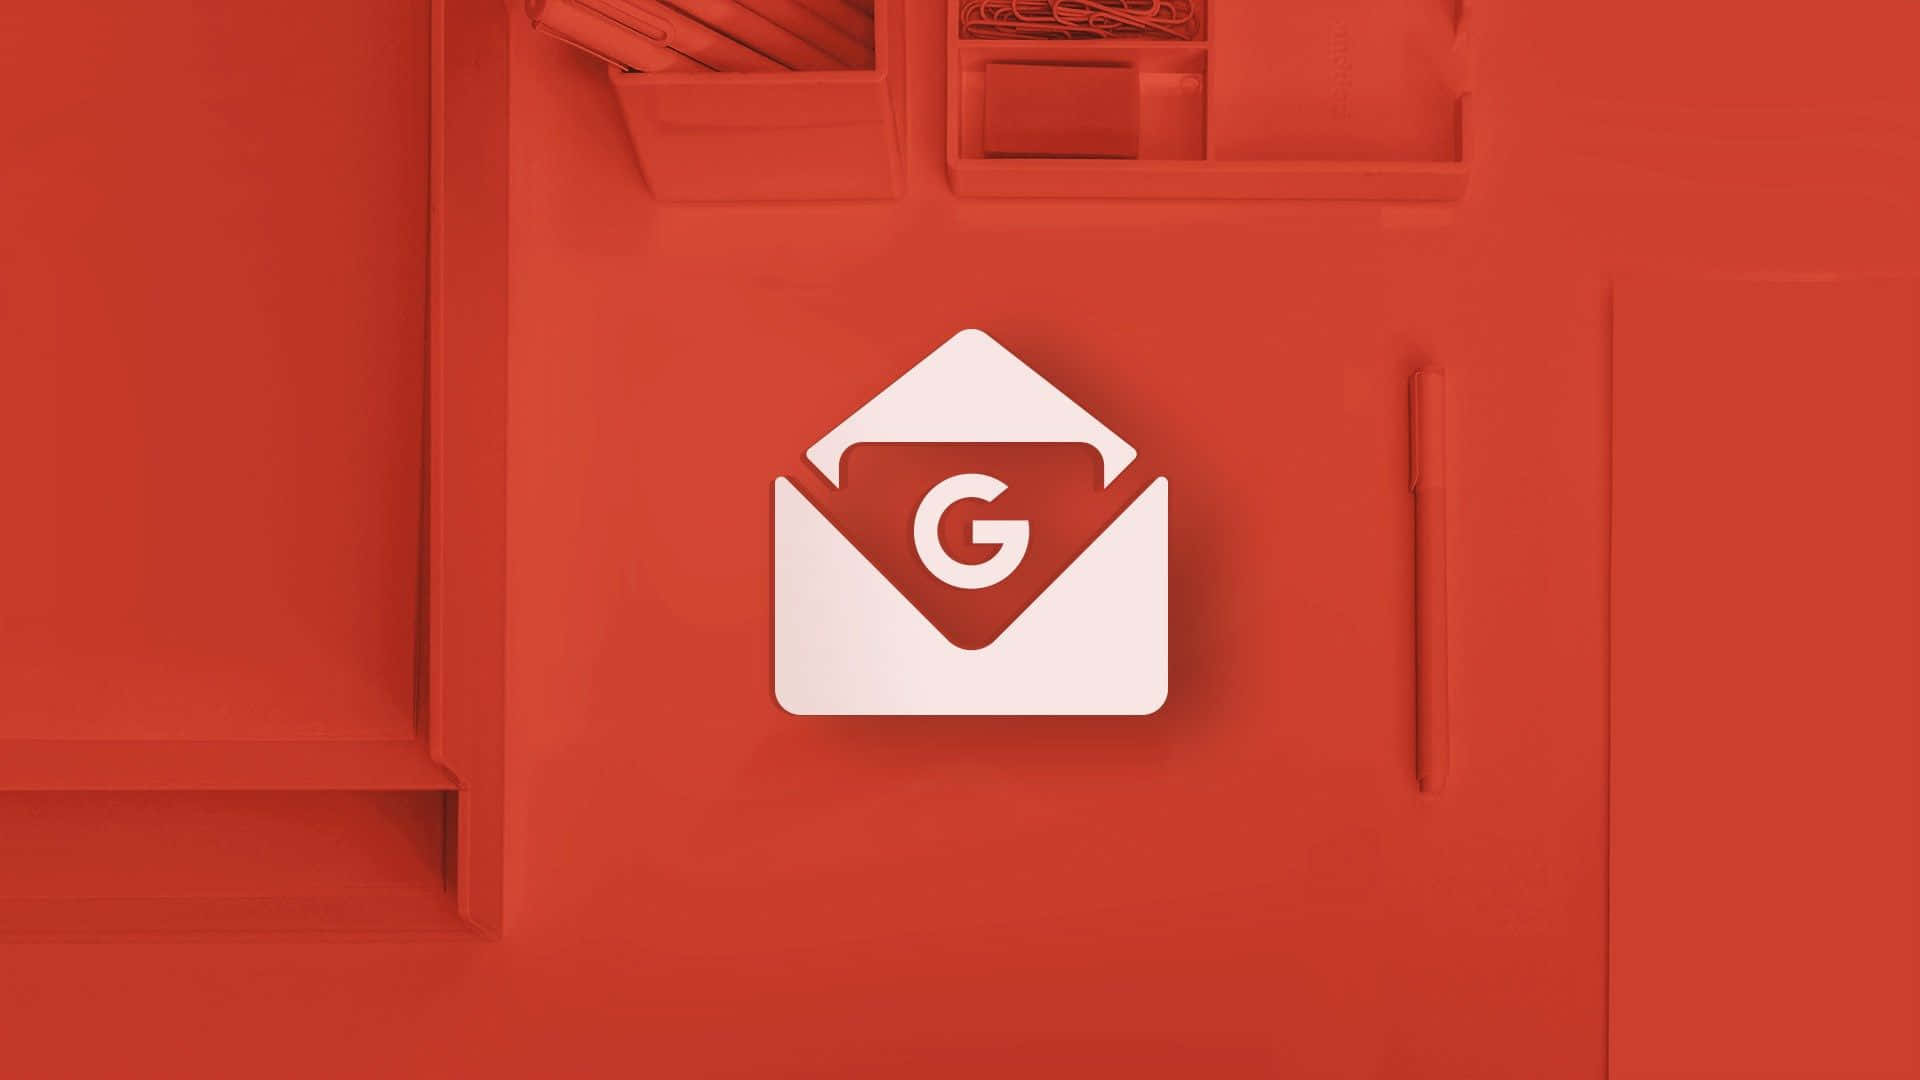 Download Google Mail Logo On A Red Background | Wallpapers.com